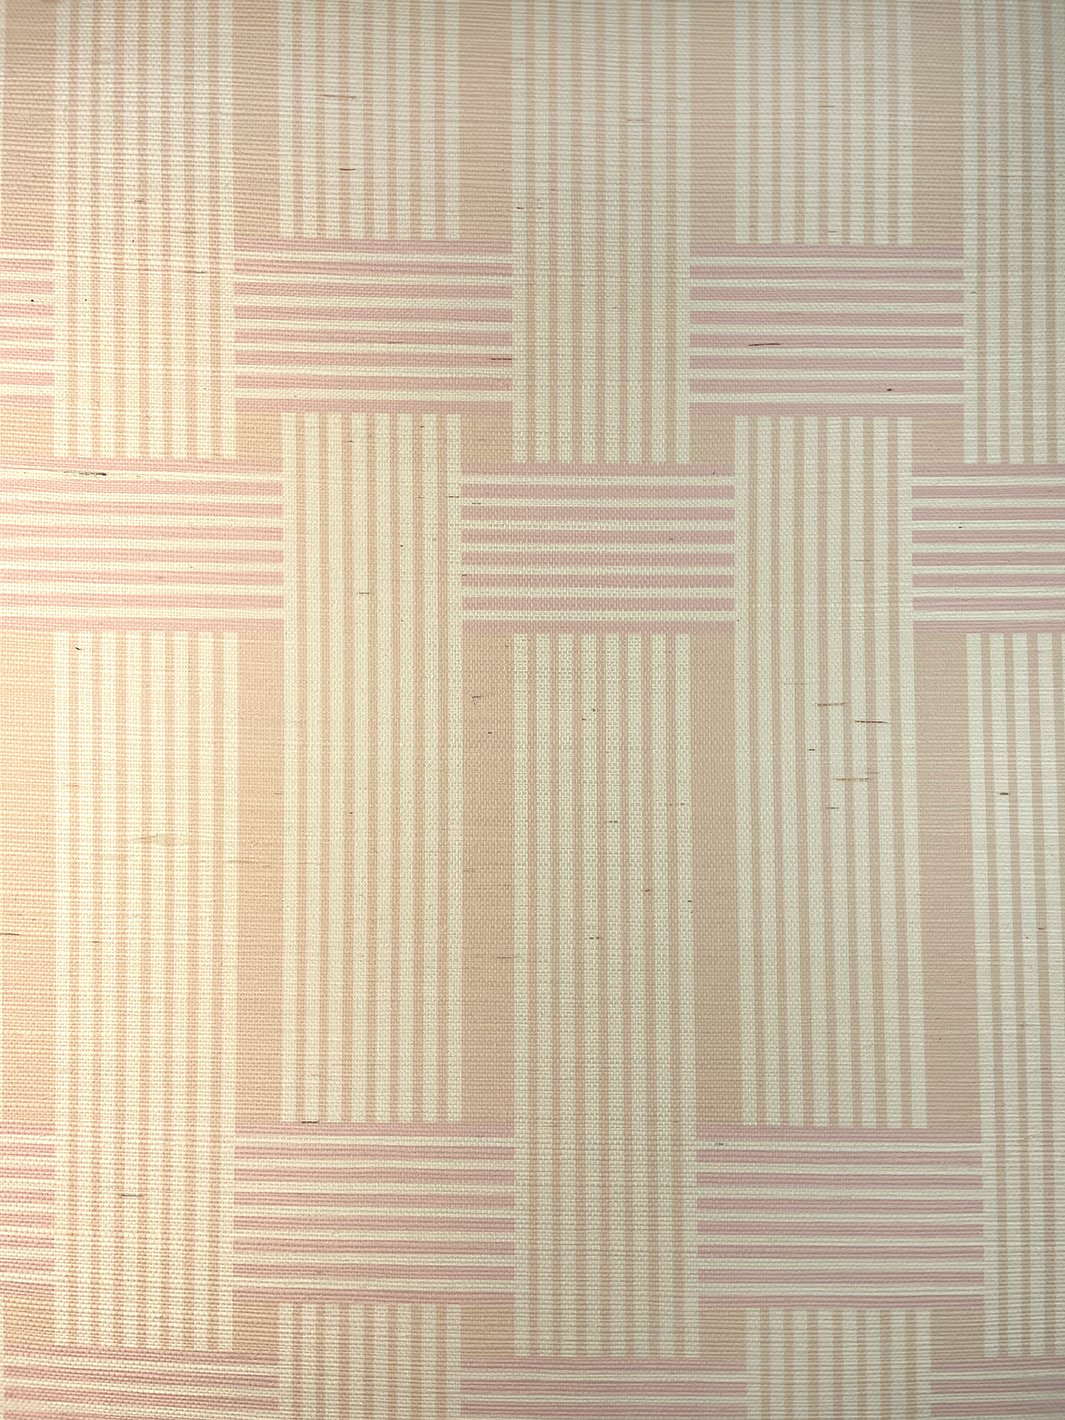 'Roman Holiday Woven' Grasscloth' Wallpaper by Barbie™ - Peach